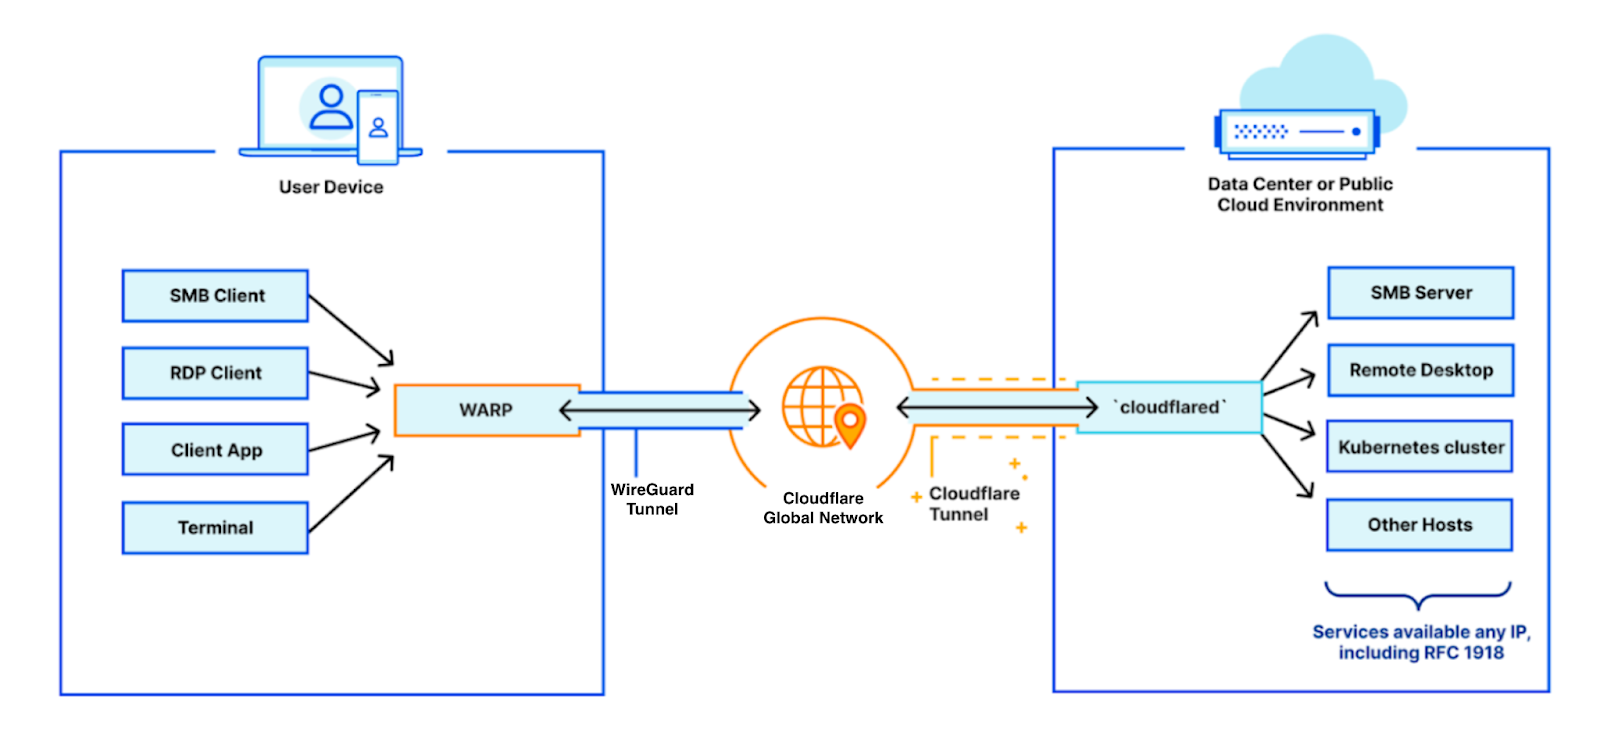 Building many private virtual networks through Cloudflare Zero Trust